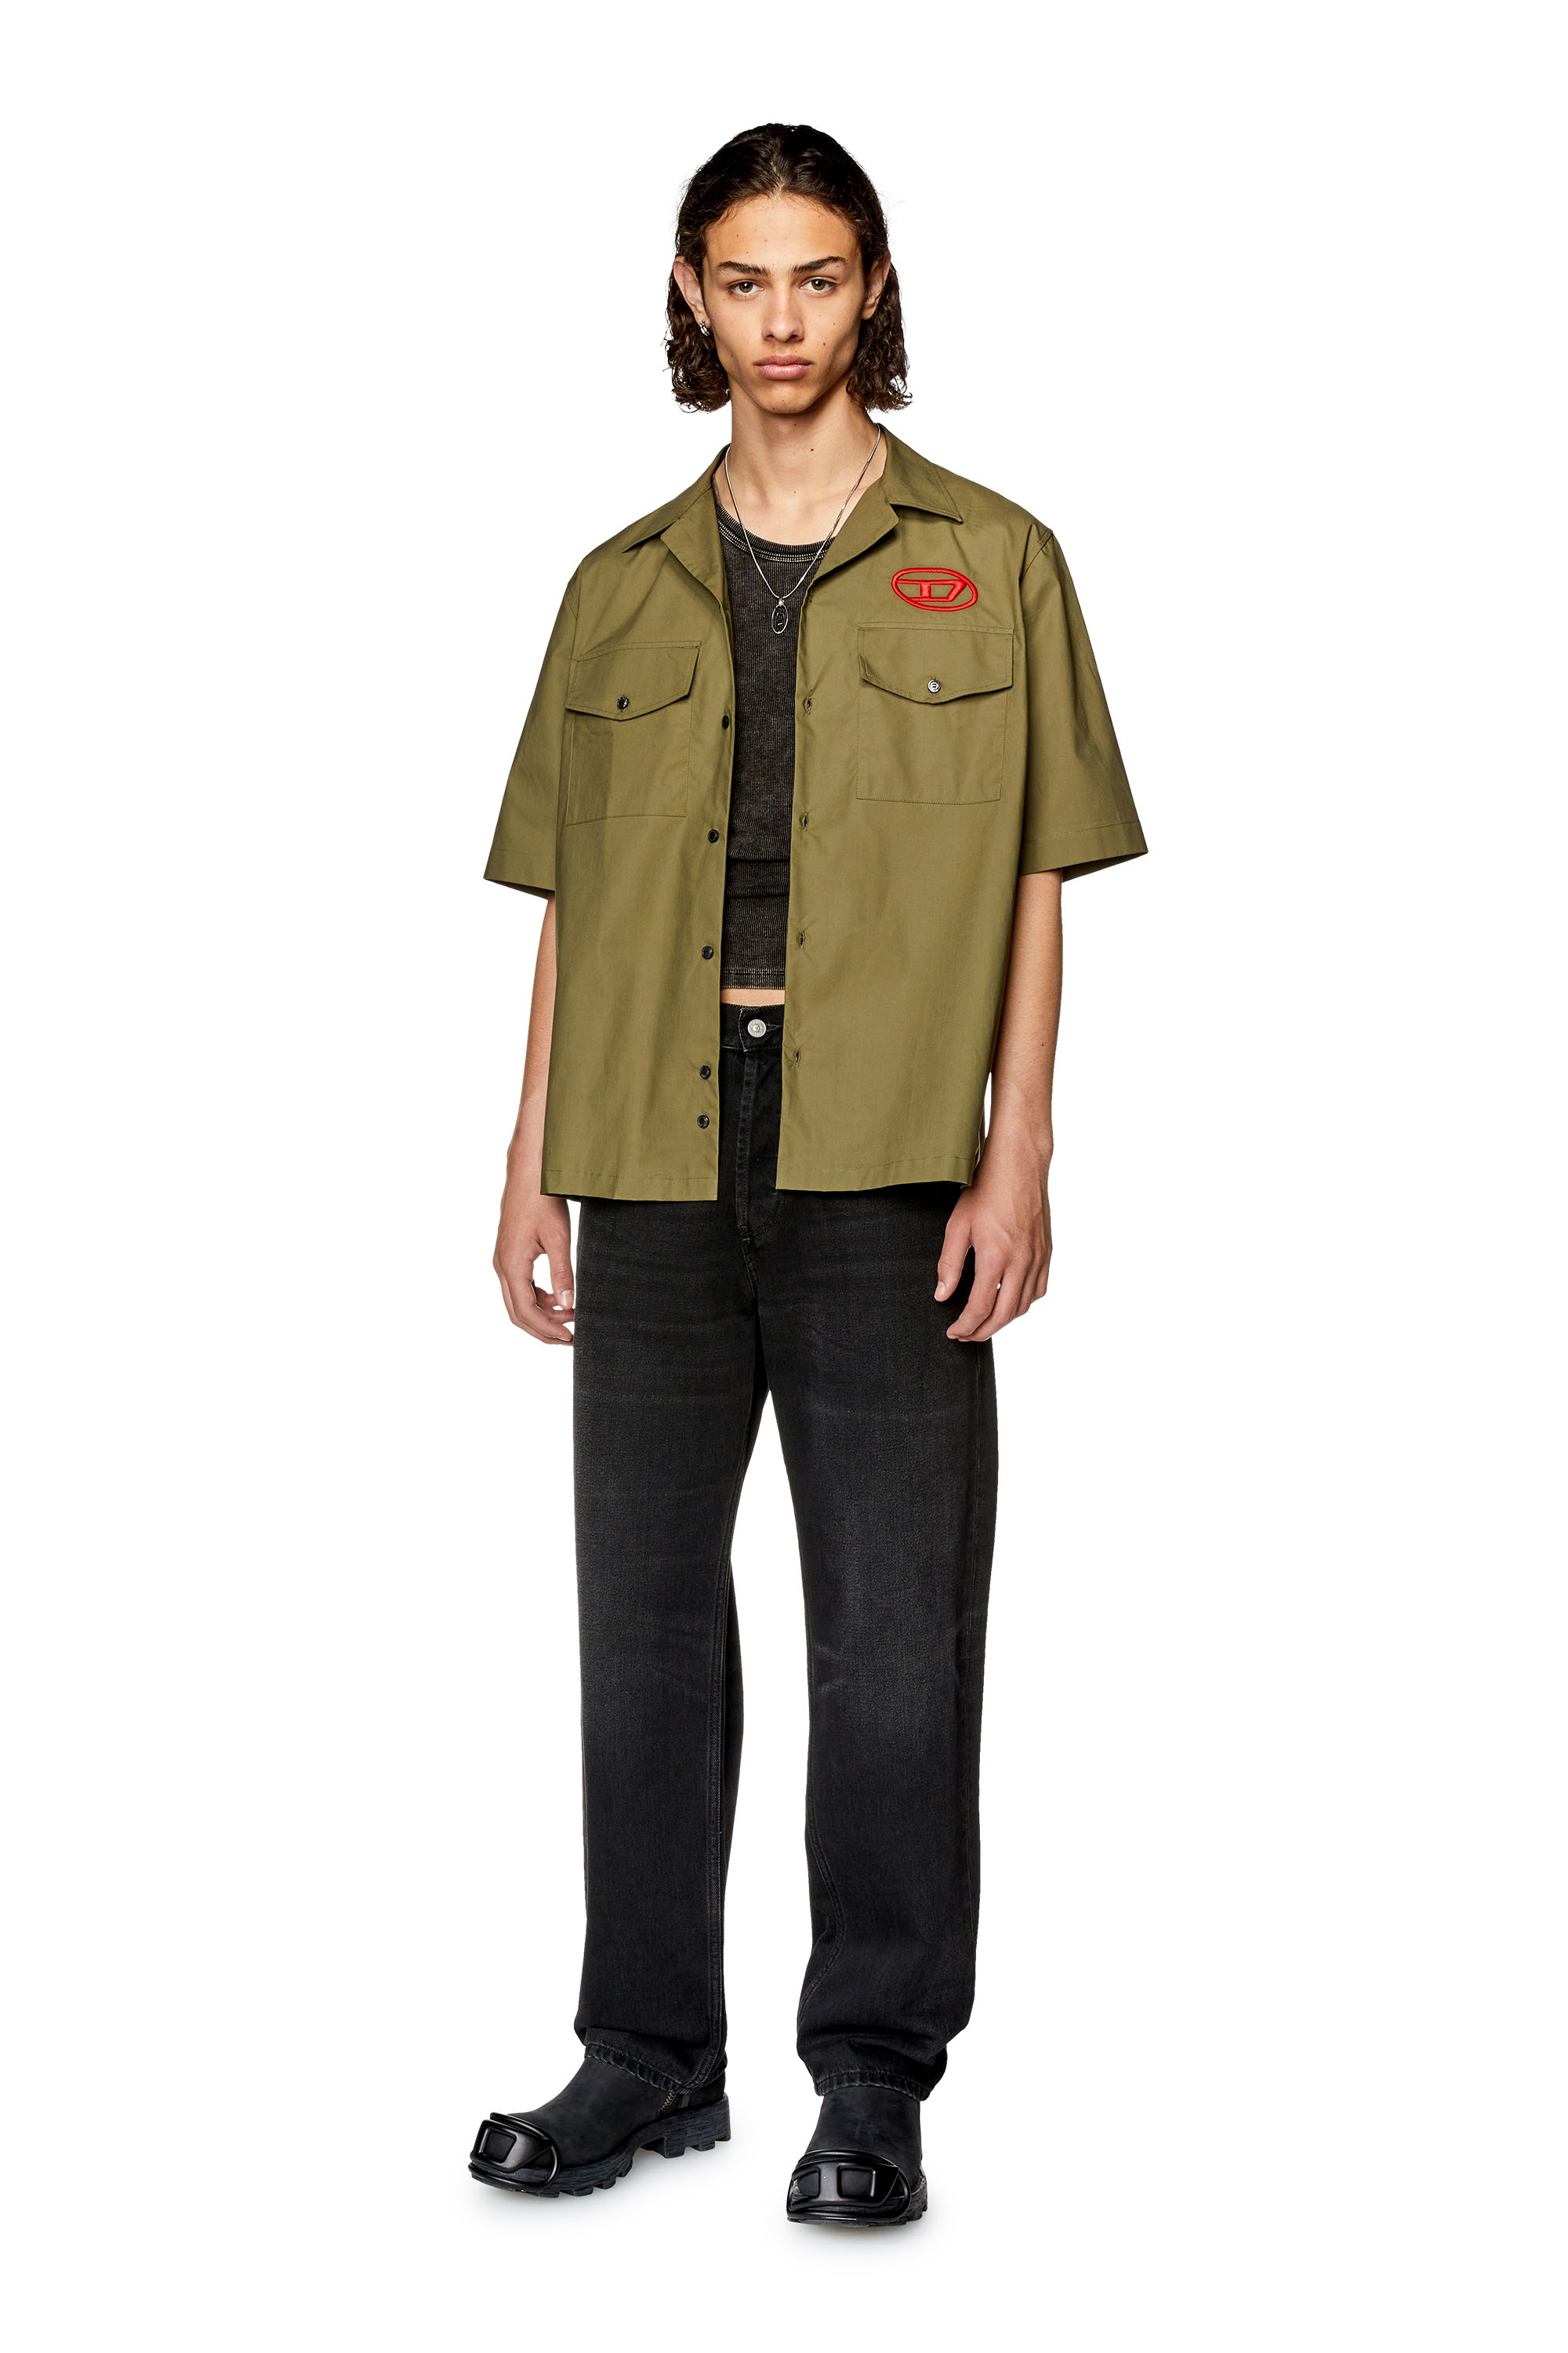 Diesel - S-MAC-22-B, Man Bowling shirt with embroidered logo in Green - Image 2